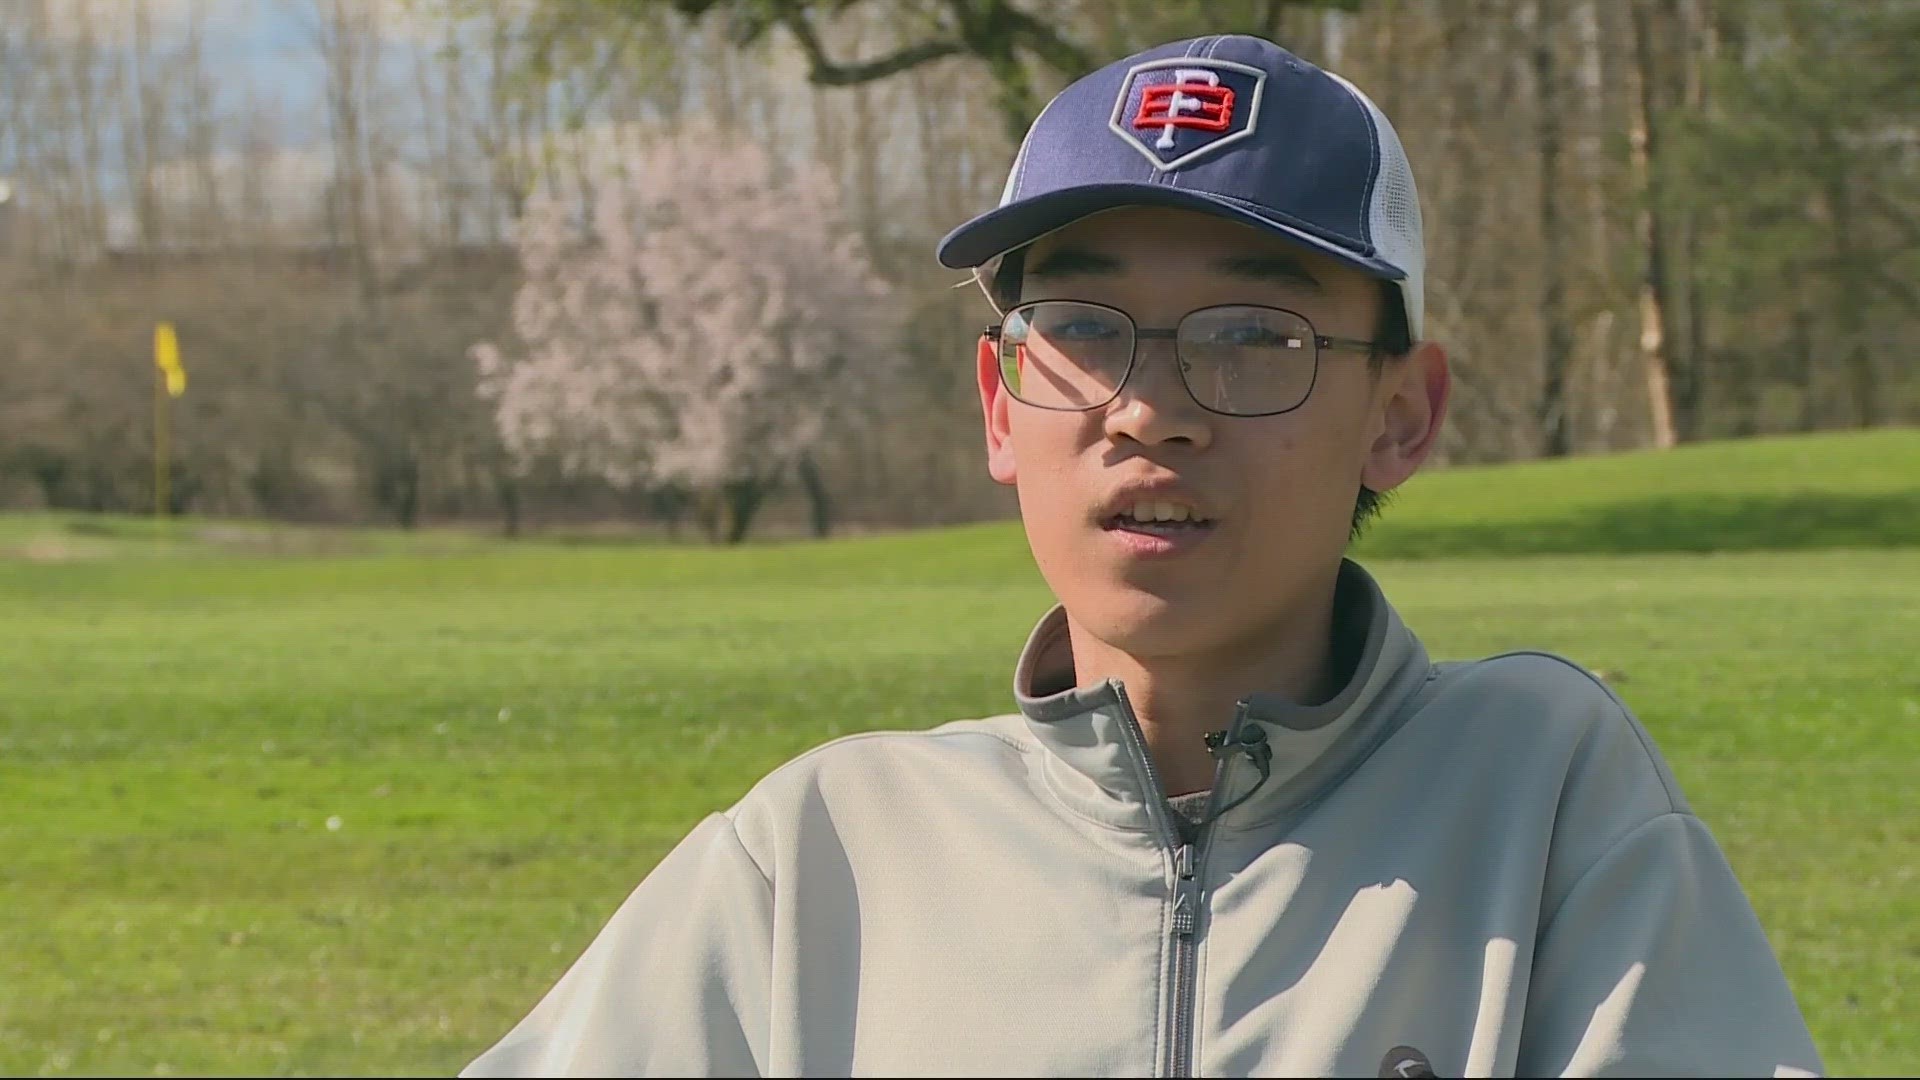 Tan Huynh had never played golf when he got his summer caddie job 3 years ago. He only wanted to help his parents but ended up earning the opportunity of a lifetime.